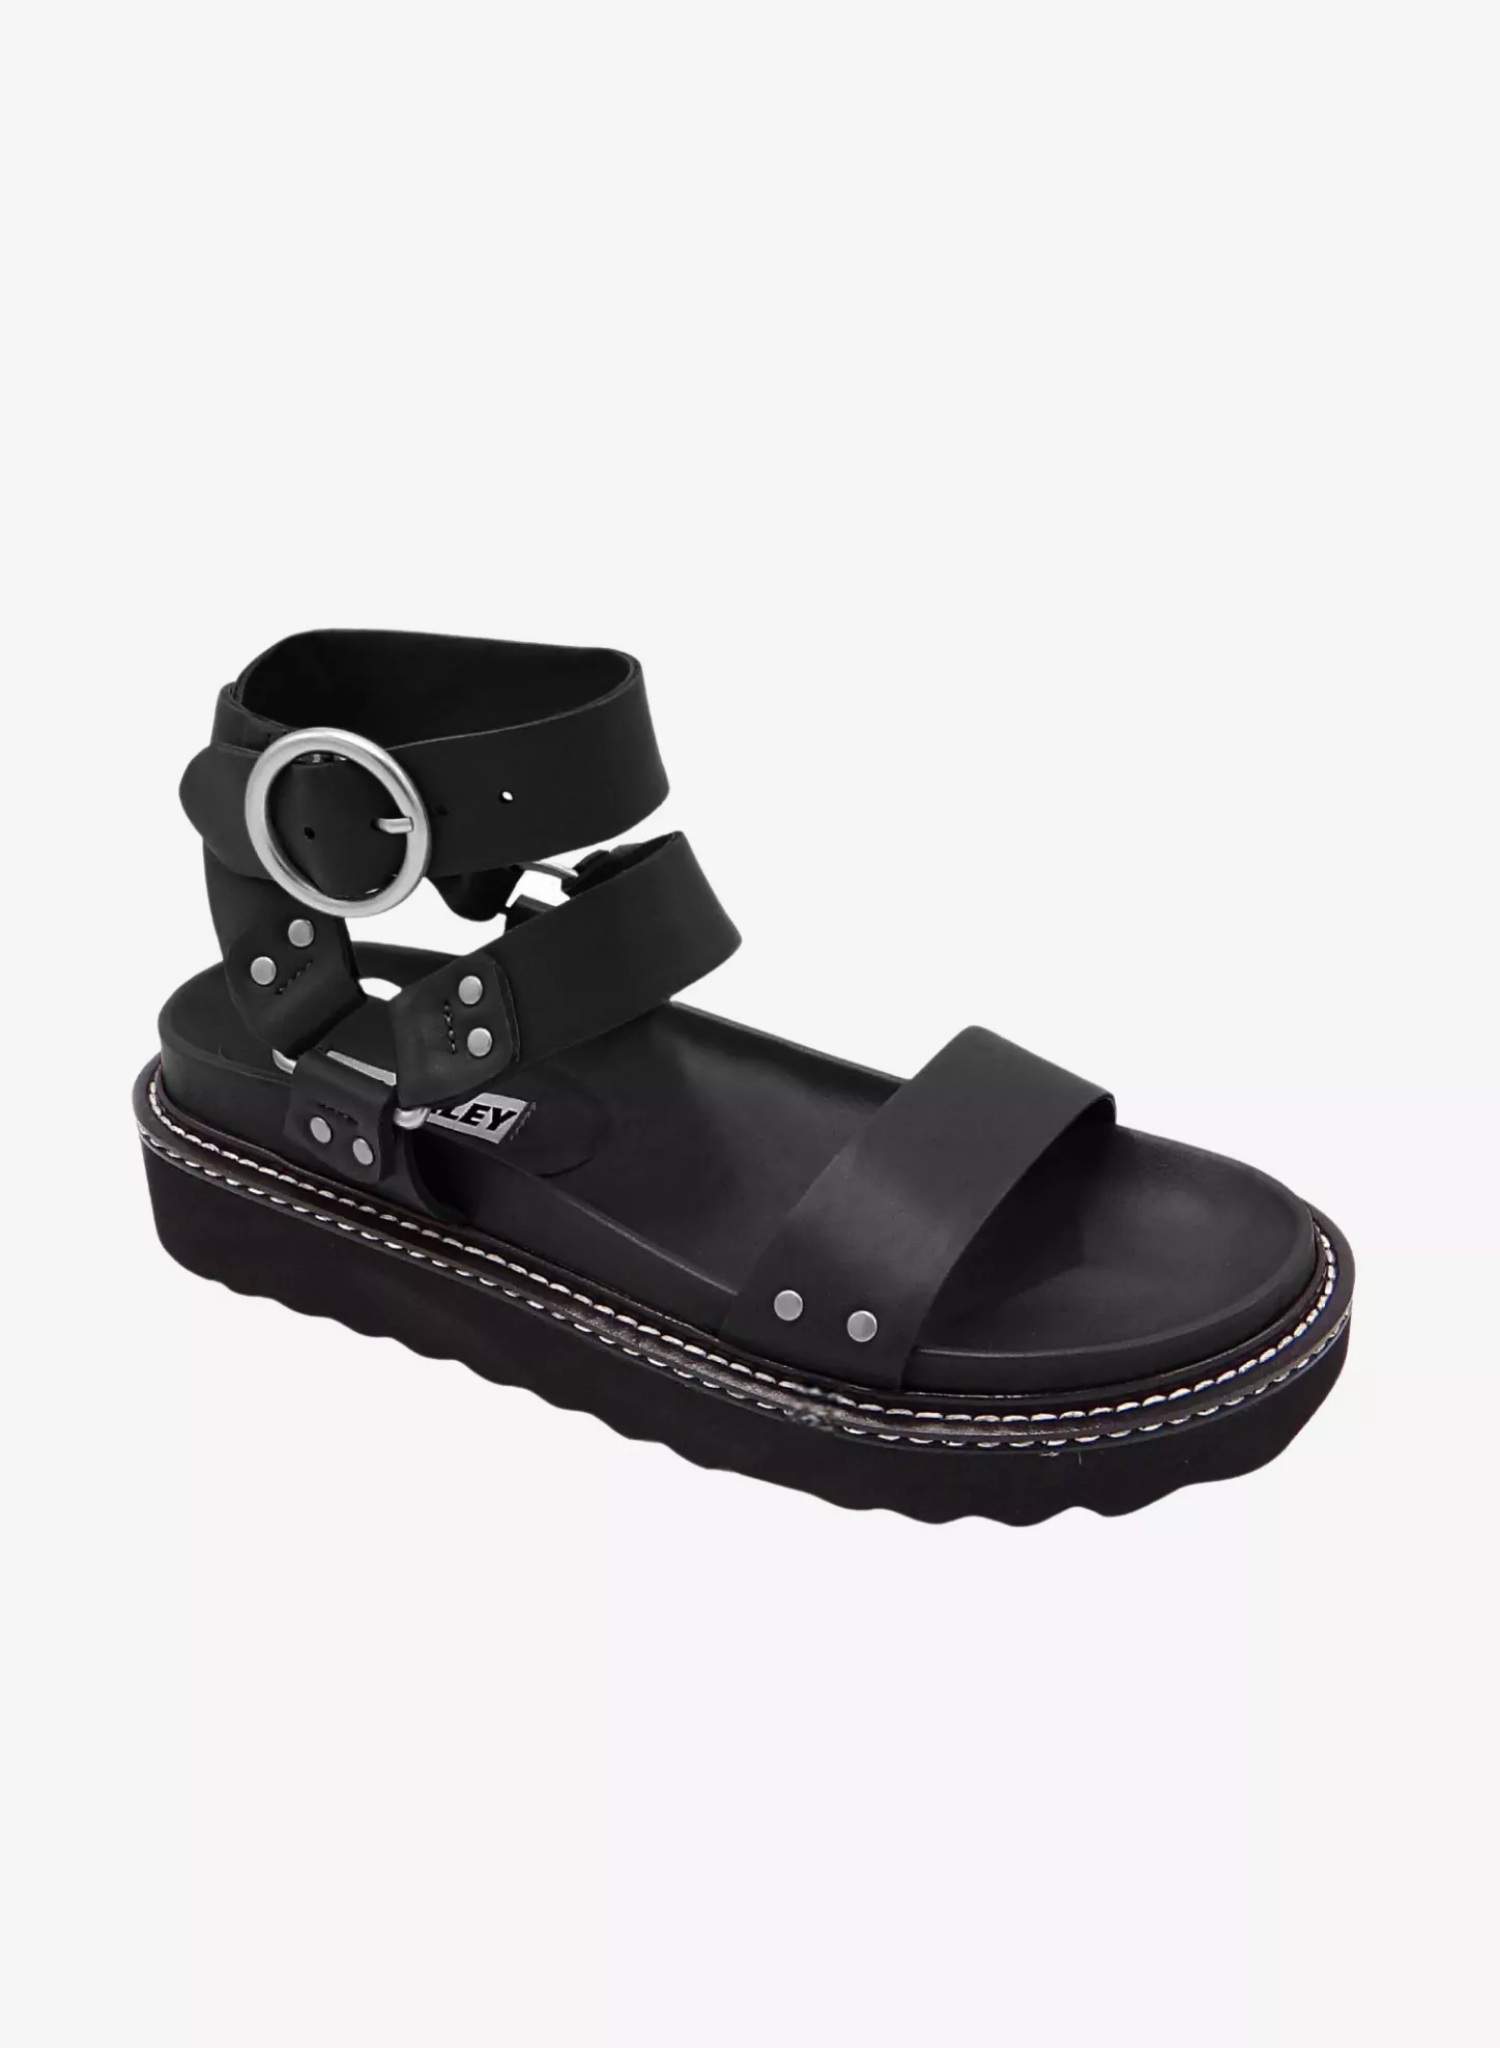 Chucky rubber sole Ankle wrap strap Adjustable buckle closure Matt Silver coloured hardware Upper/Lining:100% Leather Sole: Rubber